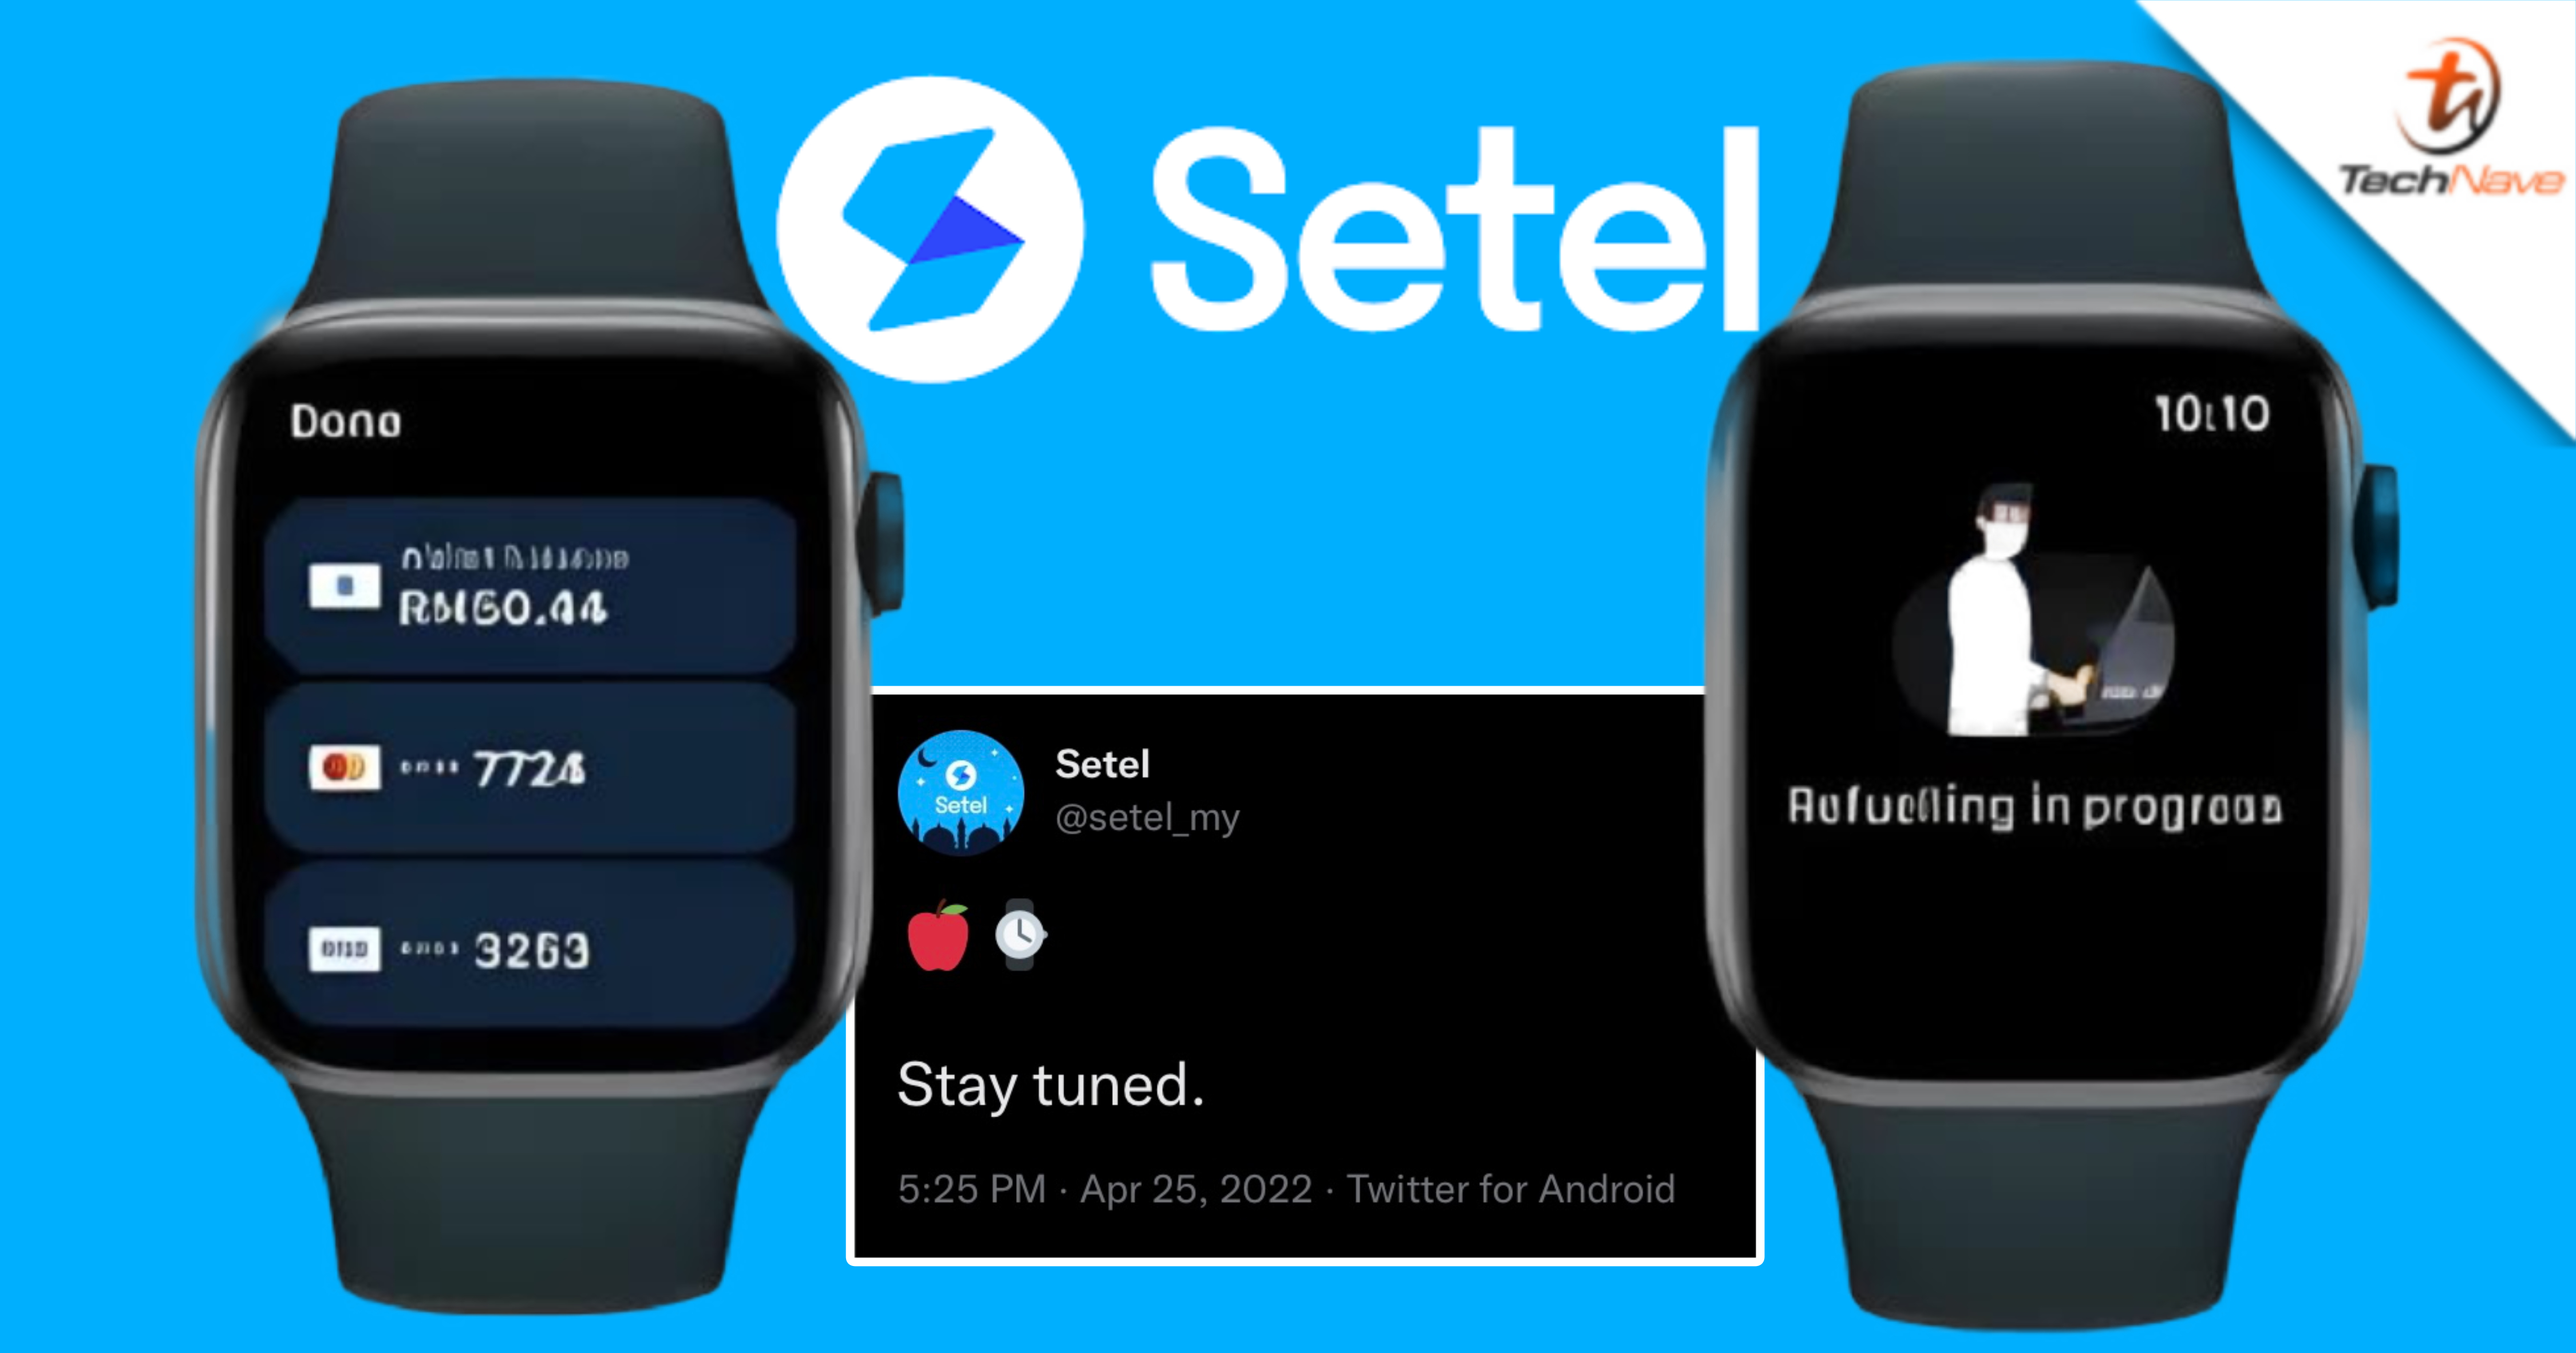 Malaysians may be able to pay for petrol using their Apple Watch soon via Setel